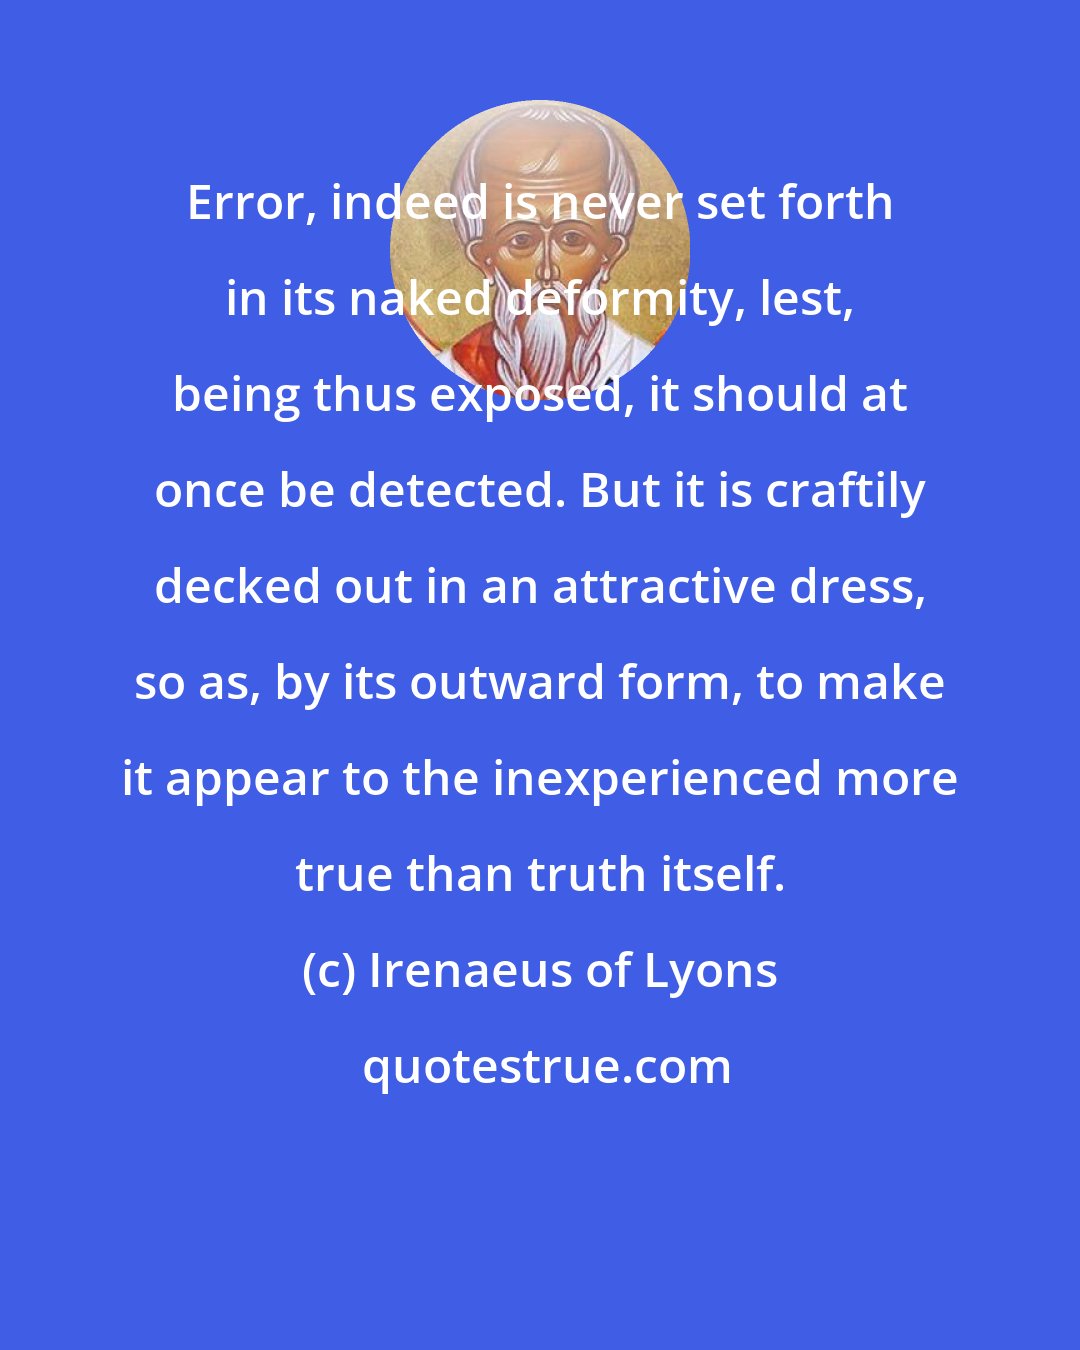 Irenaeus of Lyons: Error, indeed is never set forth in its naked deformity, lest, being thus exposed, it should at once be detected. But it is craftily decked out in an attractive dress, so as, by its outward form, to make it appear to the inexperienced more true than truth itself.